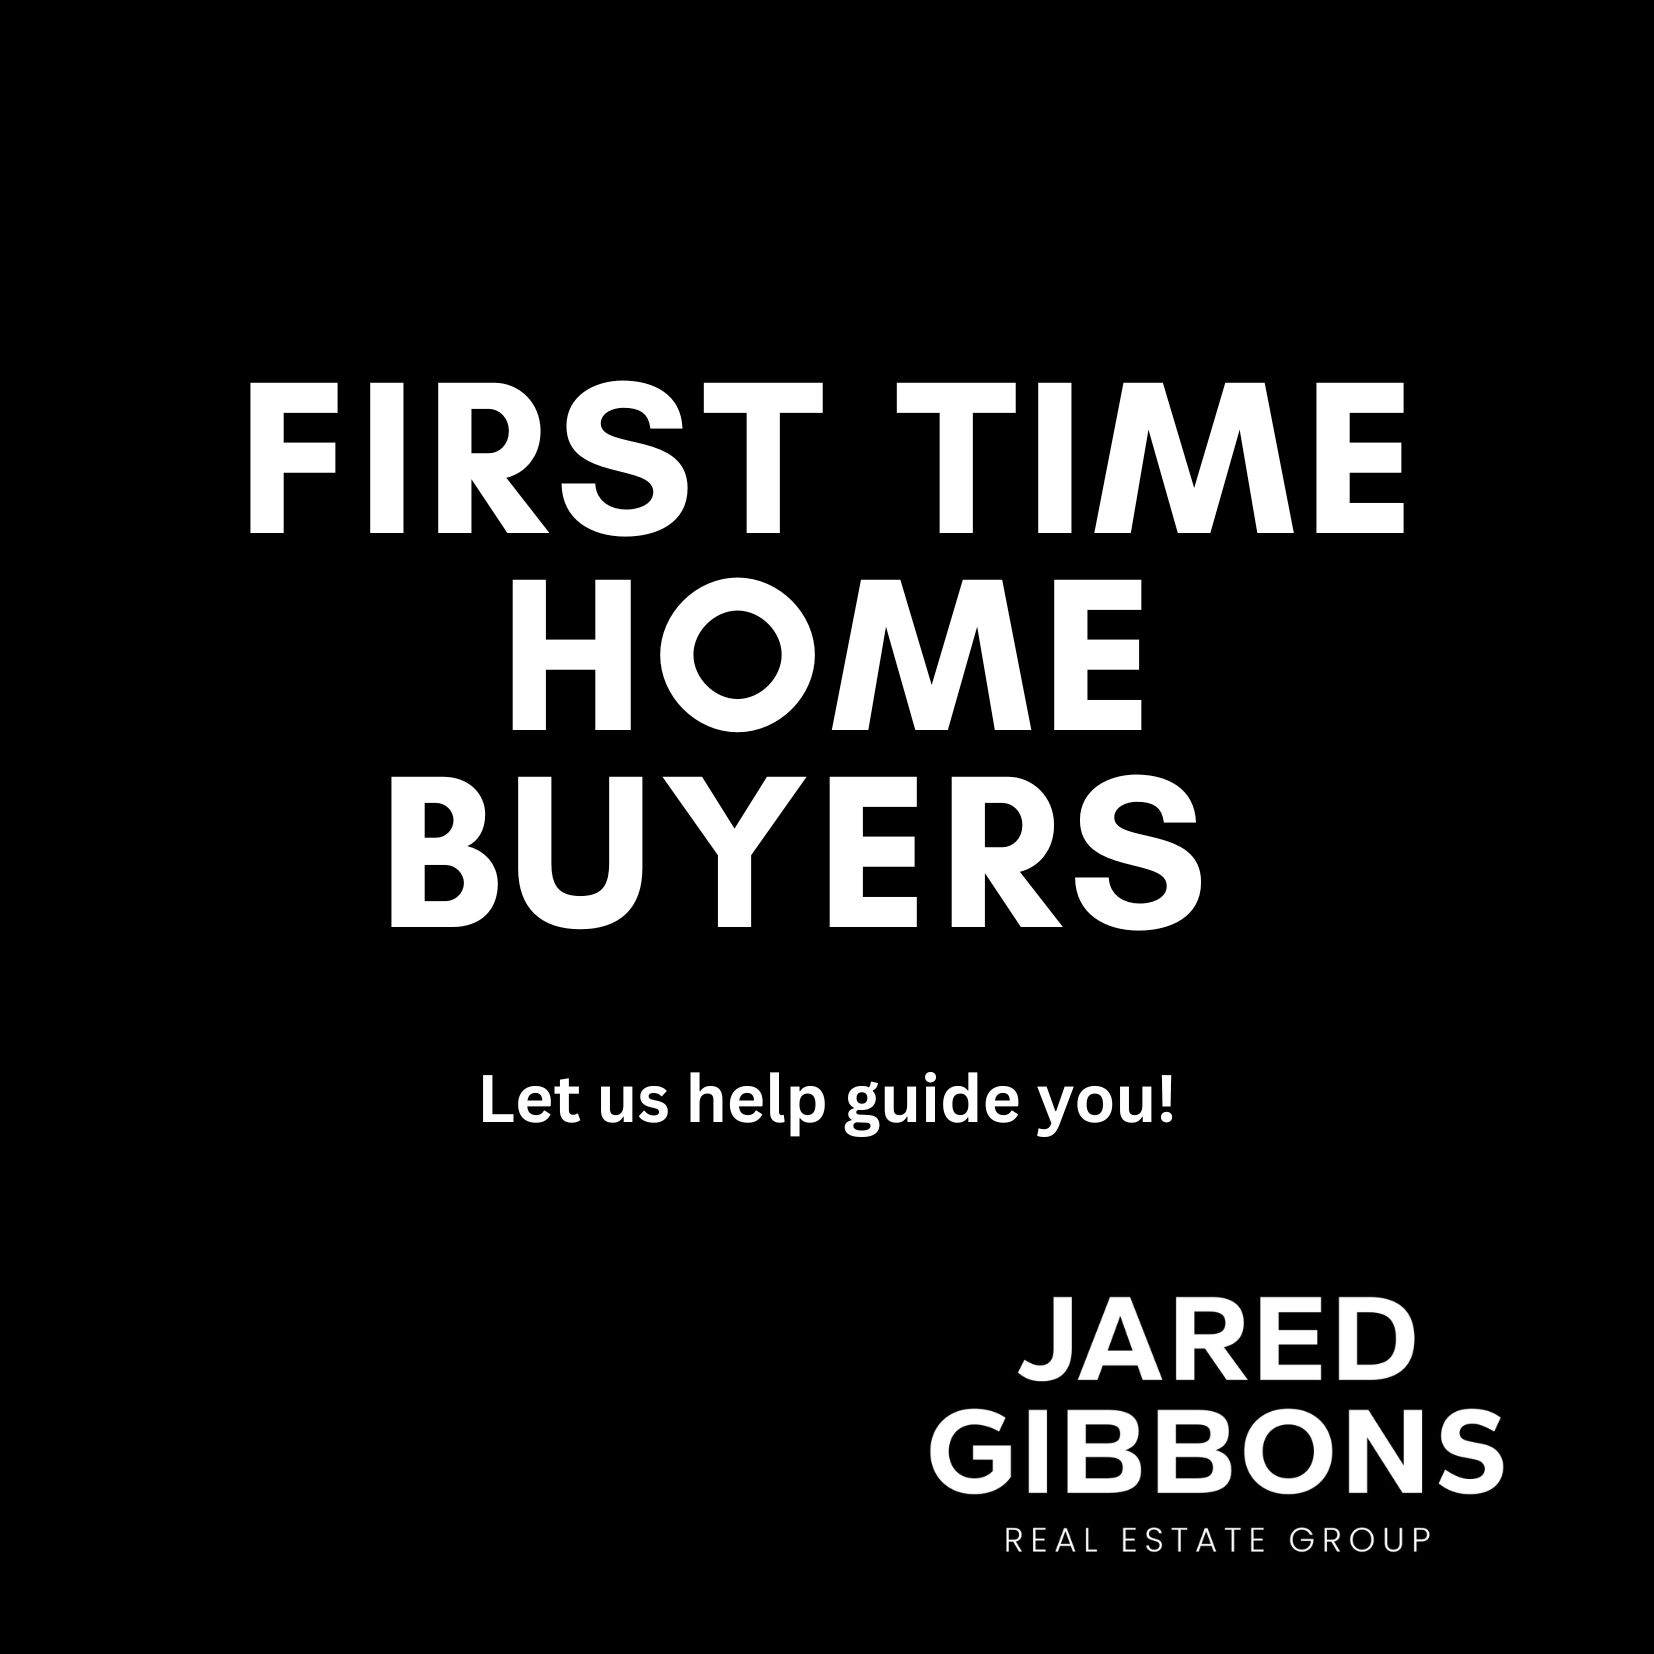 7 Strategies for First-Time Home Buyers: Tips from Jared Gibbons